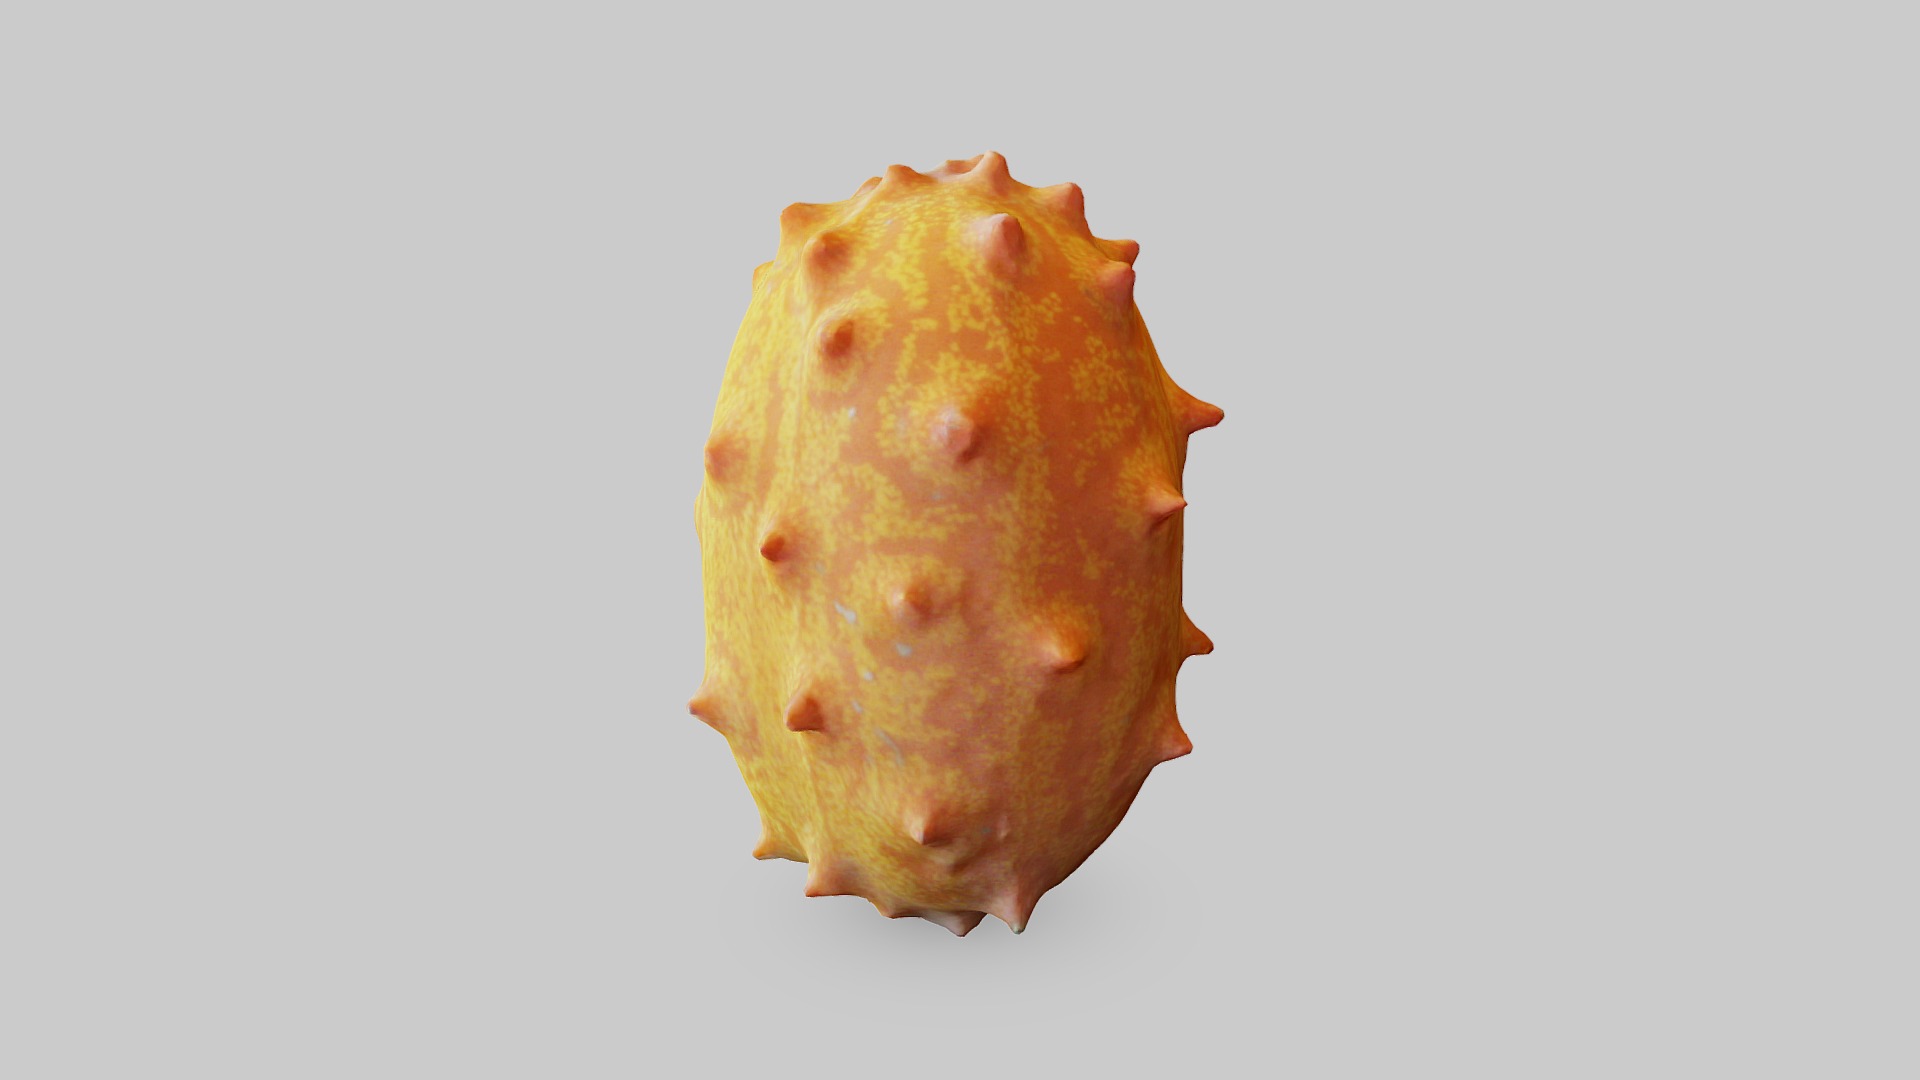 3D model Kiwano Cucumis metuliferus - This is a 3D model of the Kiwano Cucumis metuliferus. The 3D model is about a piece of food.